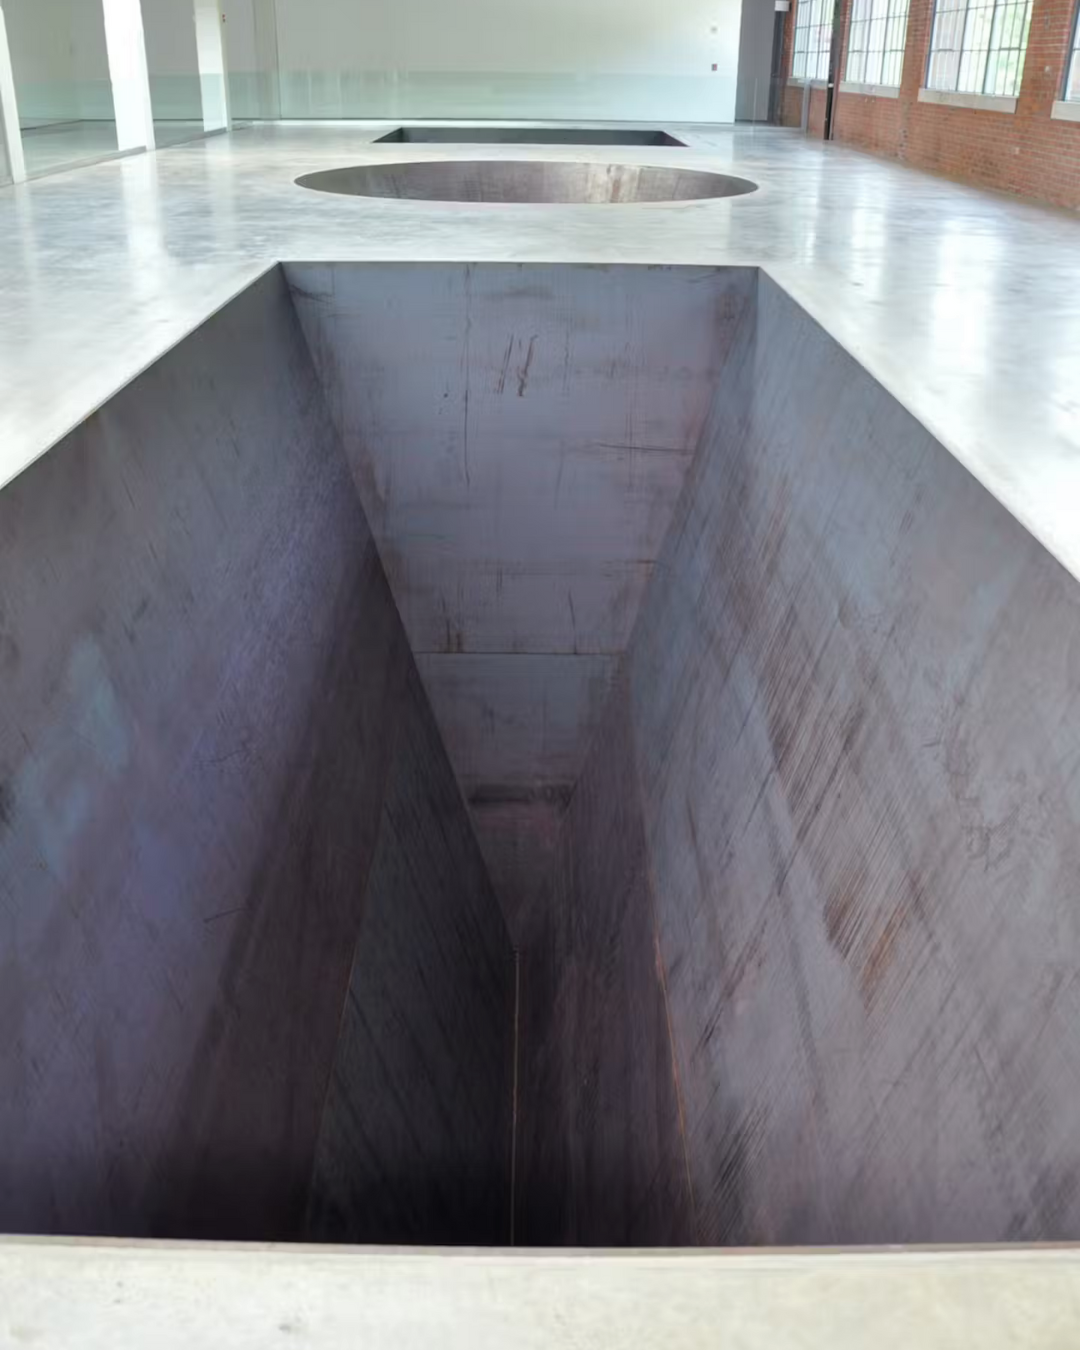 North, East, South, West by Michael Heizer